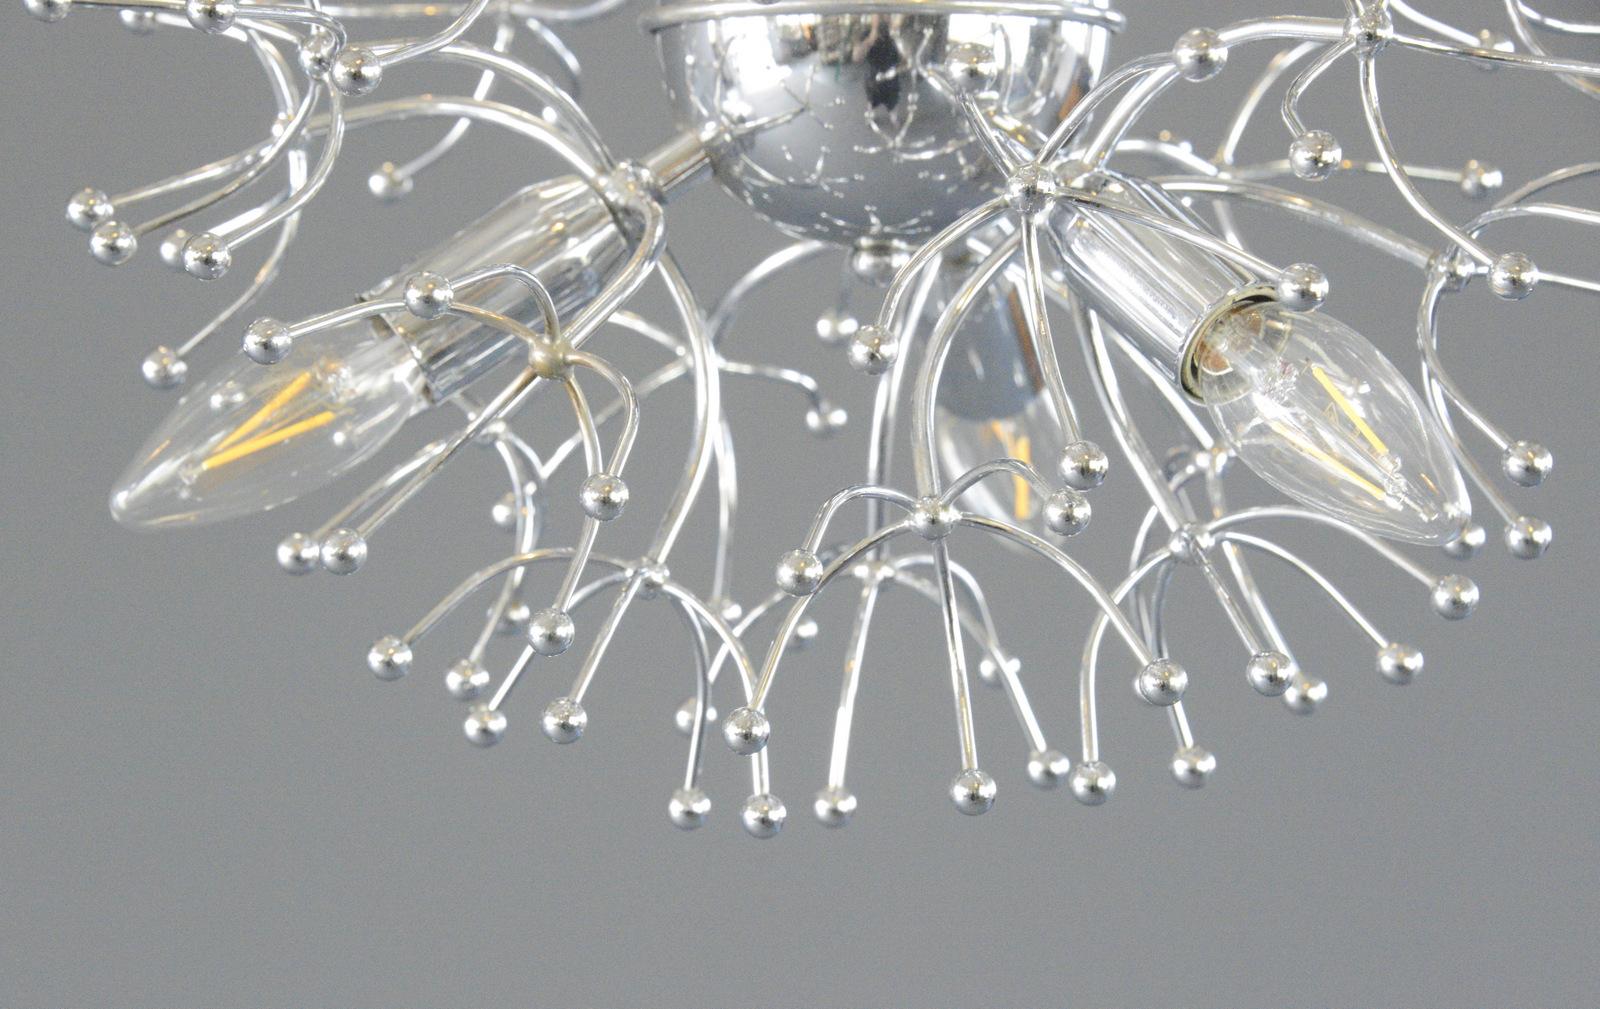 Mid Century Sputnik Pendant Light By Sciolari Circa 1960s

- Chrome plated brass arms
- Takes 6x E14 bulbs
- By Gaetano Sciolari
- Italian ~ 1960s
- 40cm wide x 40cm tall
- 145cm from ceiling rose to base of the light, this is adjustable

Condition